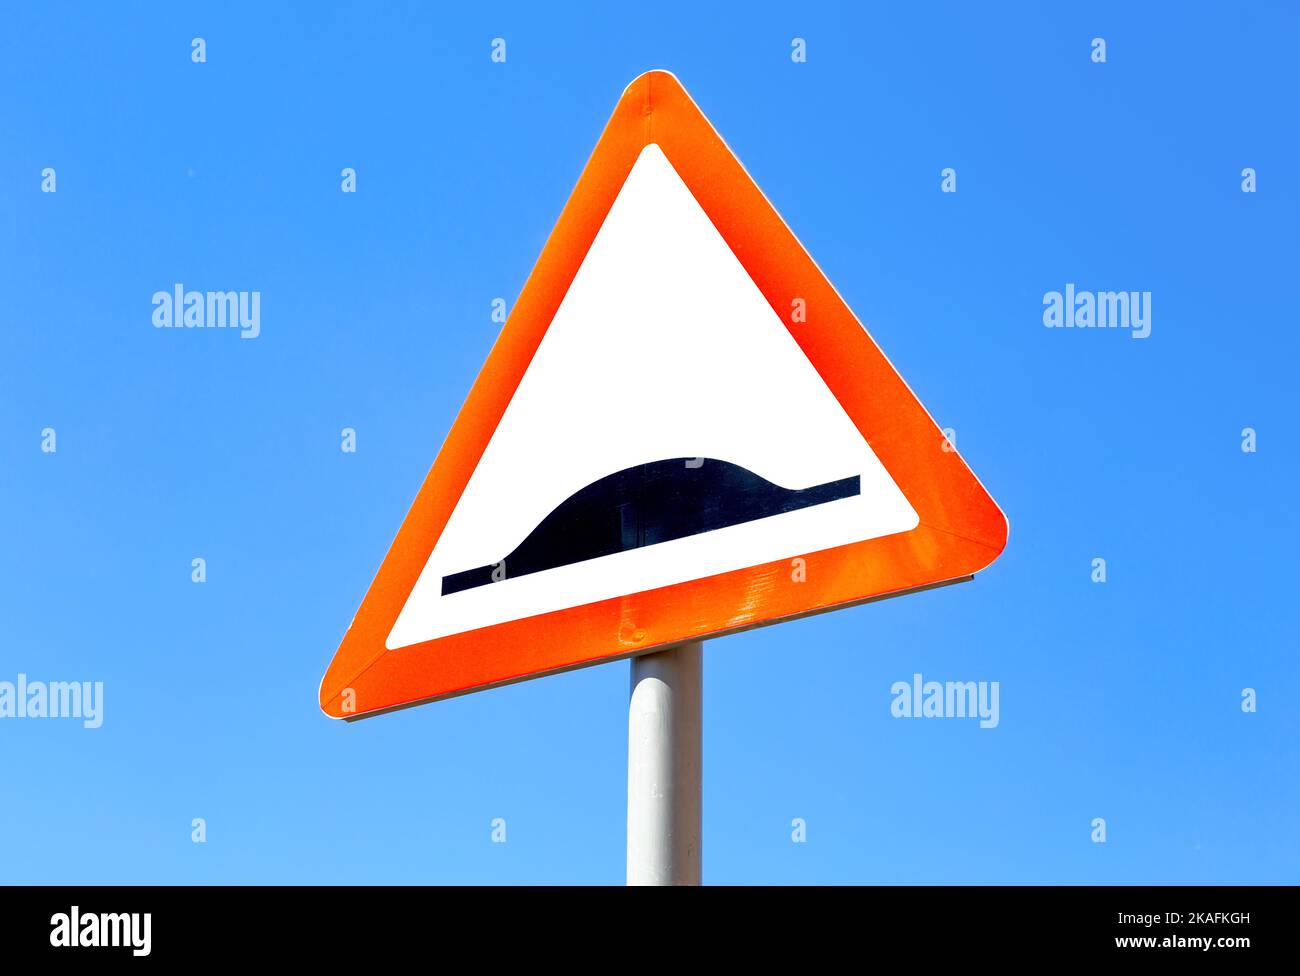 Triangle speed bump road sign against the blue sky. Warning traffic sign Speed bump Stock Photo